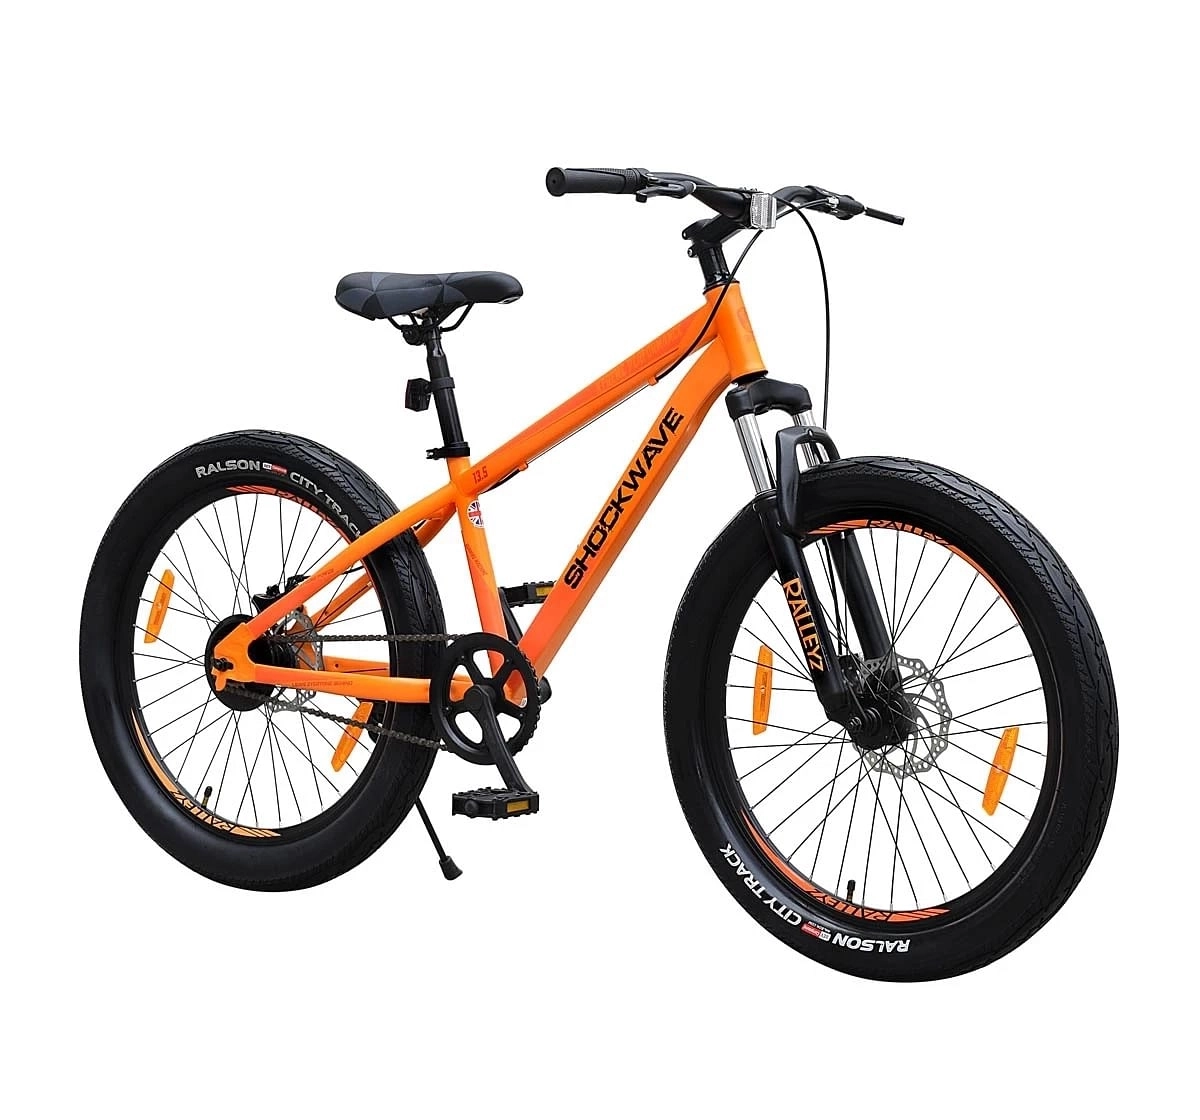 Ralleyz Astra Shockwave 24 Inch, Bicycles For Kids, Multicolour, 9Y+